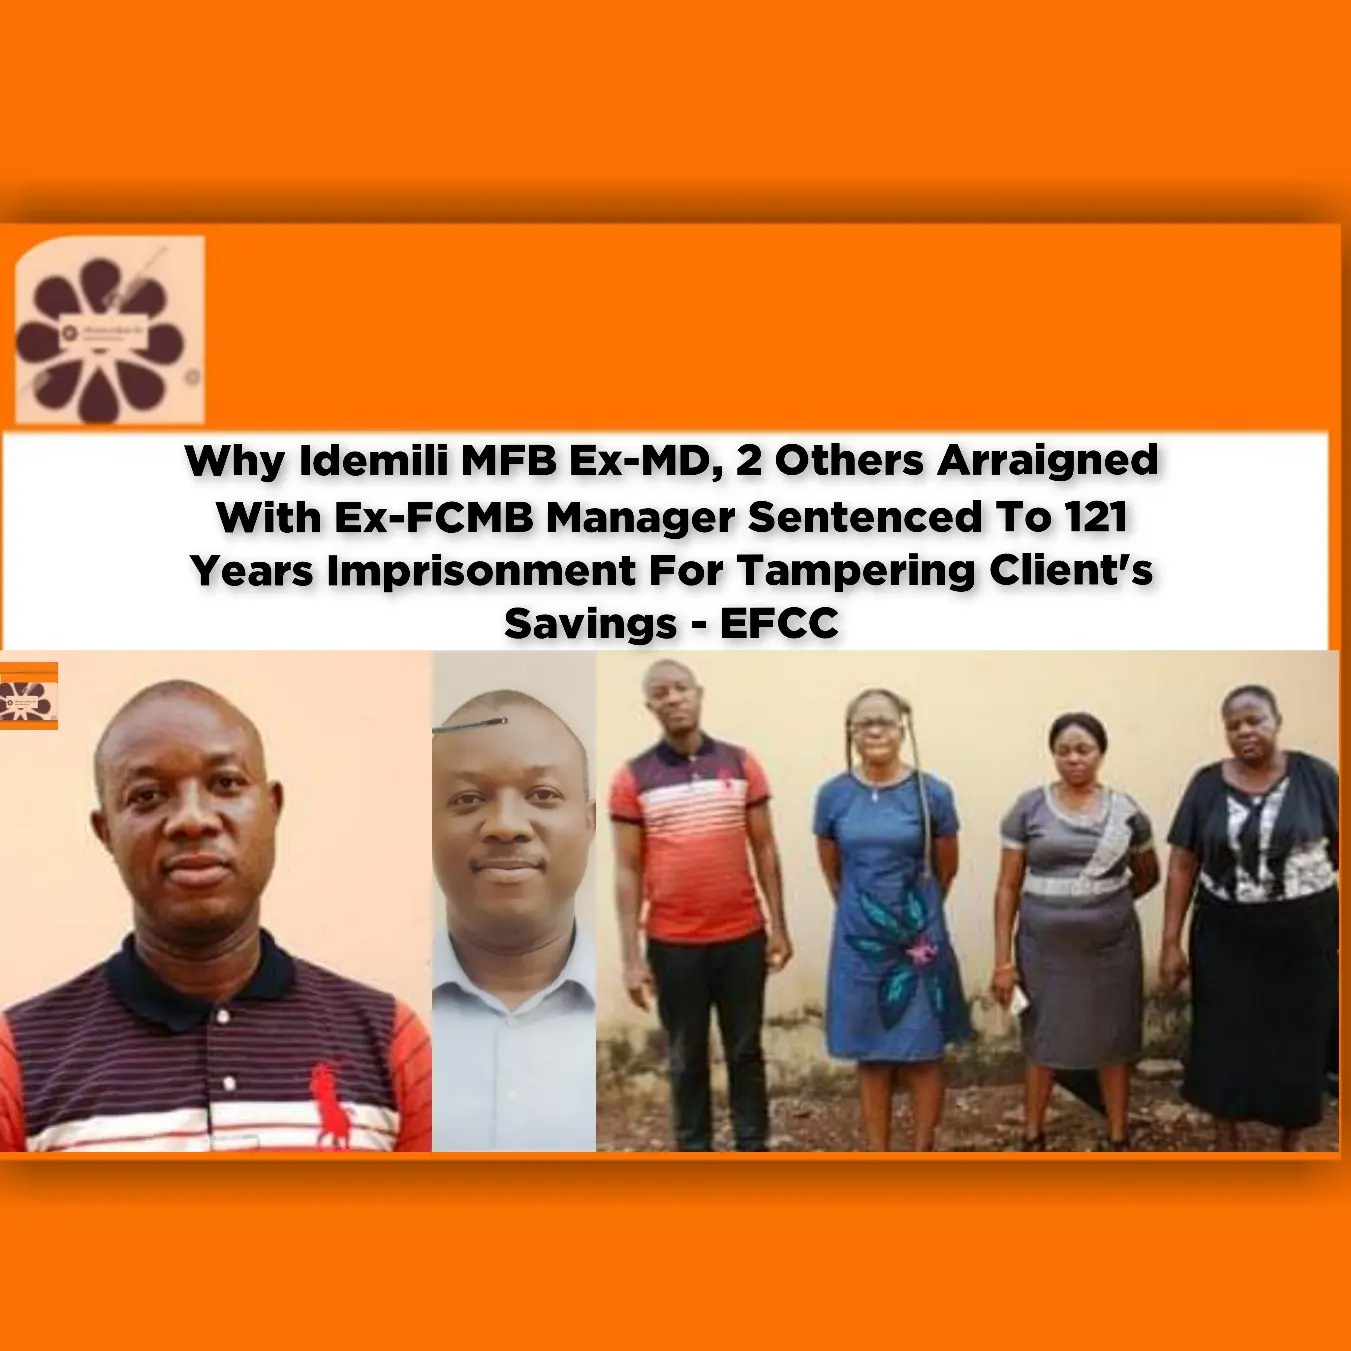 Why Idemili MFB Ex-MD, 2 Others Arraigned With Ex-FCMB Manager Sentenced To 121 Years Imprisonment For Tampering Client's Savings - EFCC ~ OsazuwaAkonedo #Ifeoluwa